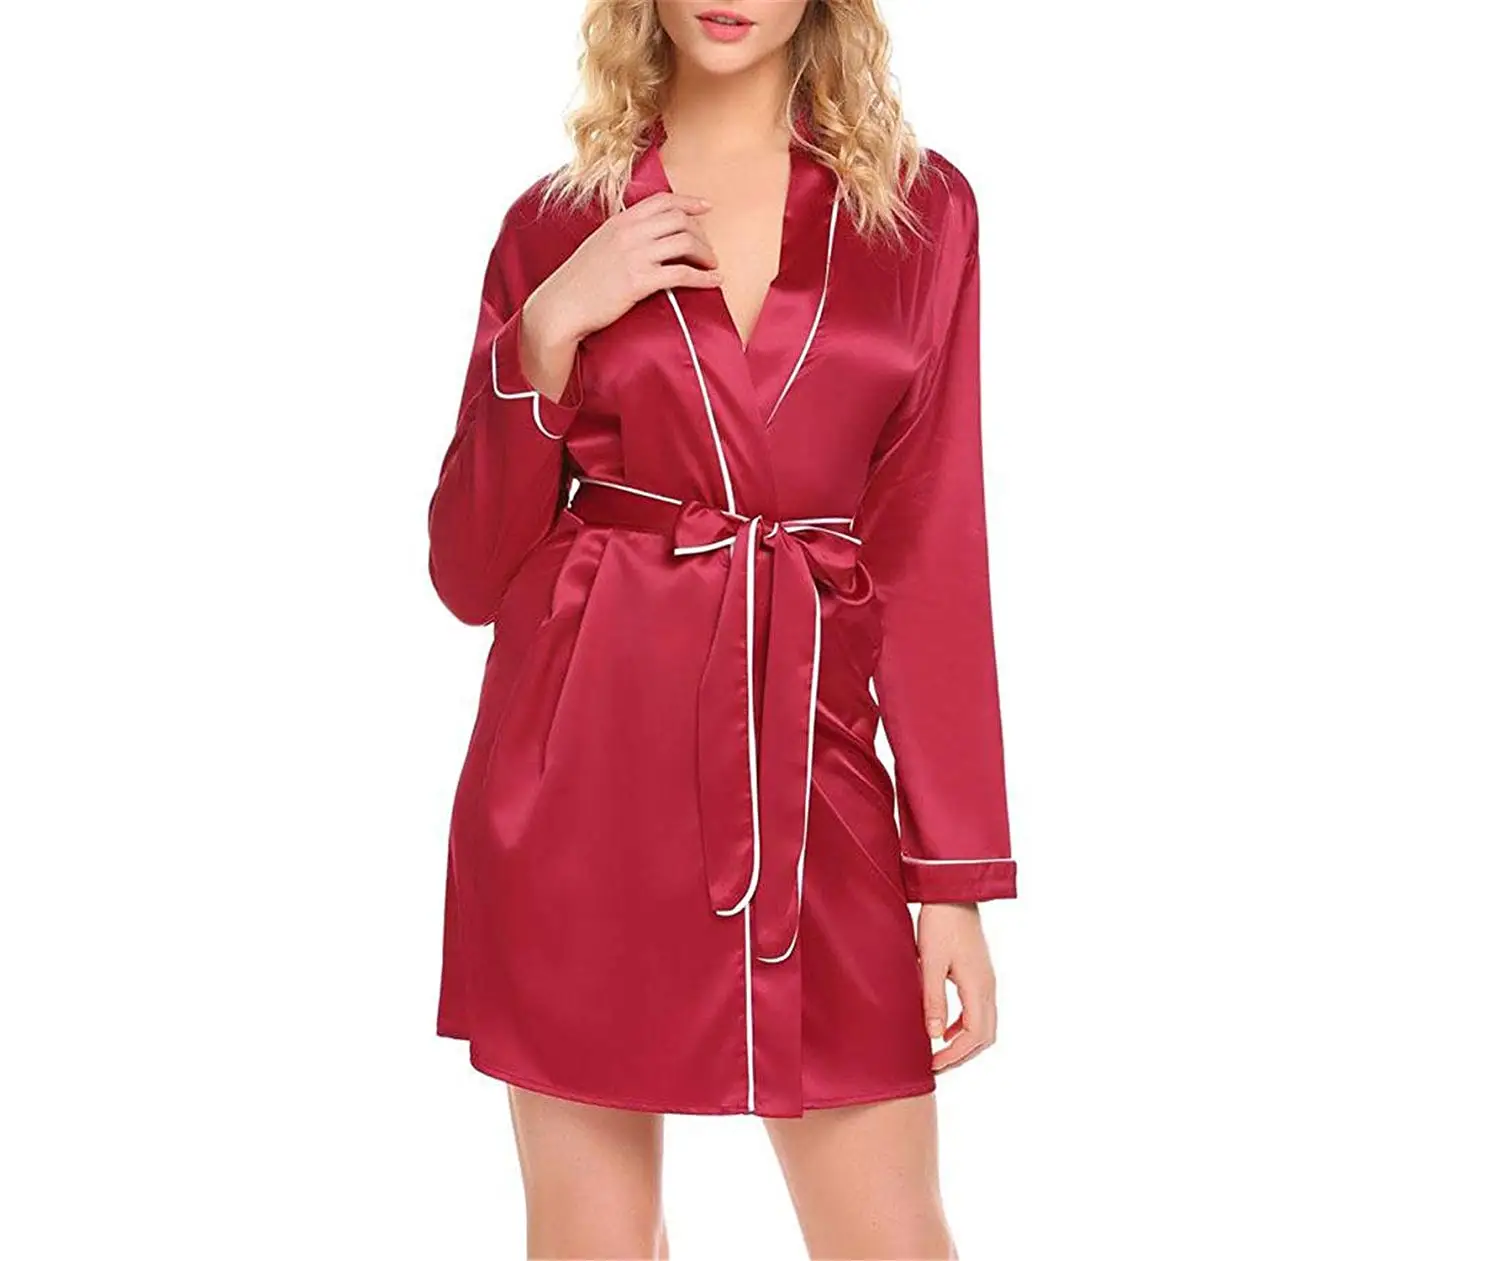 Cheap Sexy Bath Robes Find Sexy Bath Robes Deals On Line At Aliba